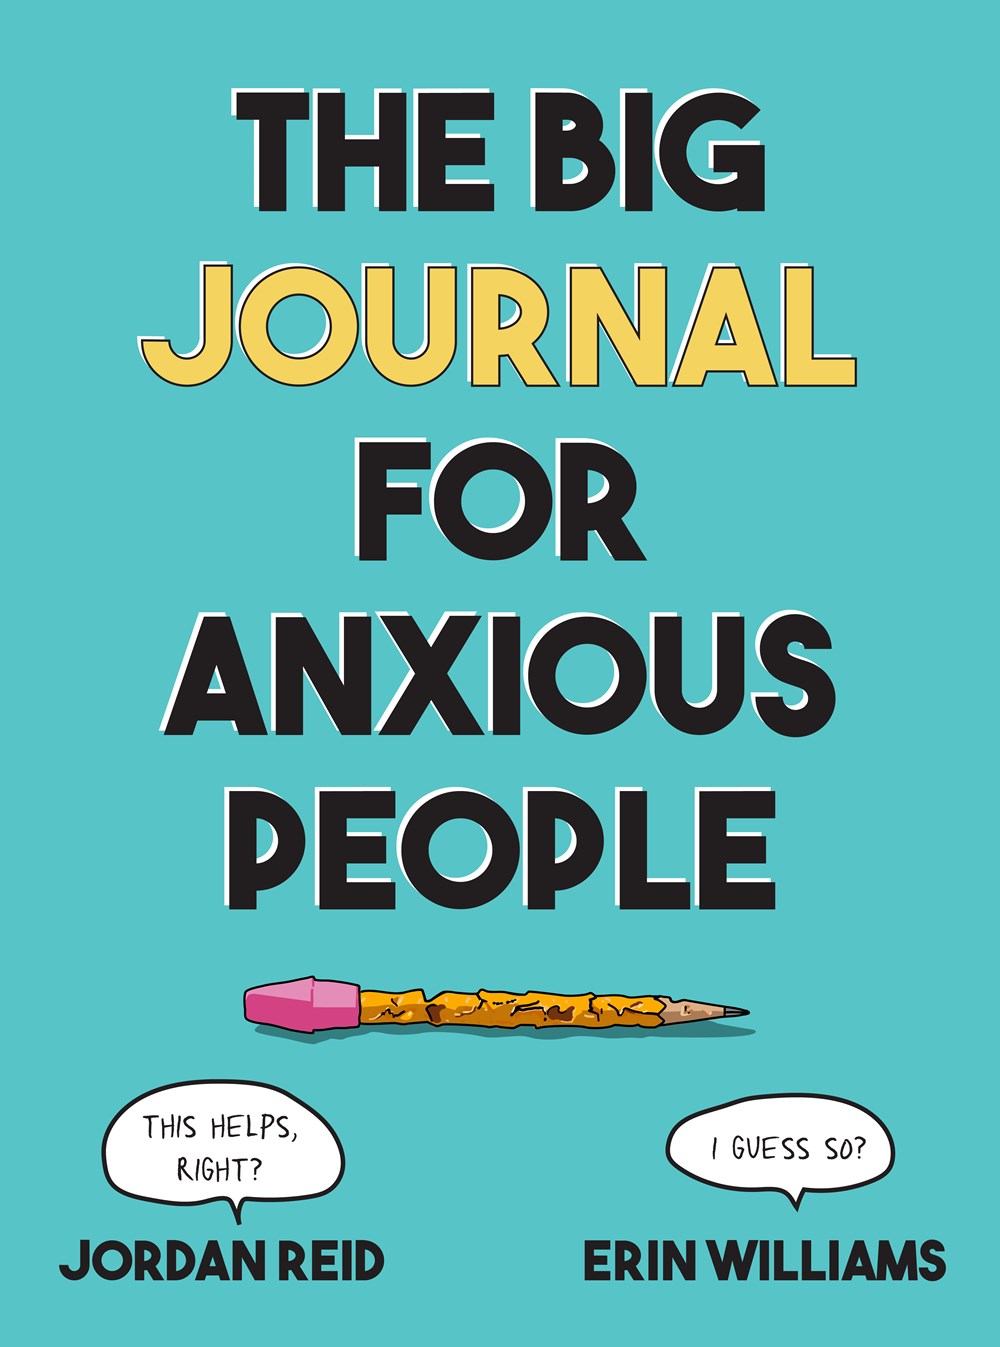 The Big Journal for Anxious People